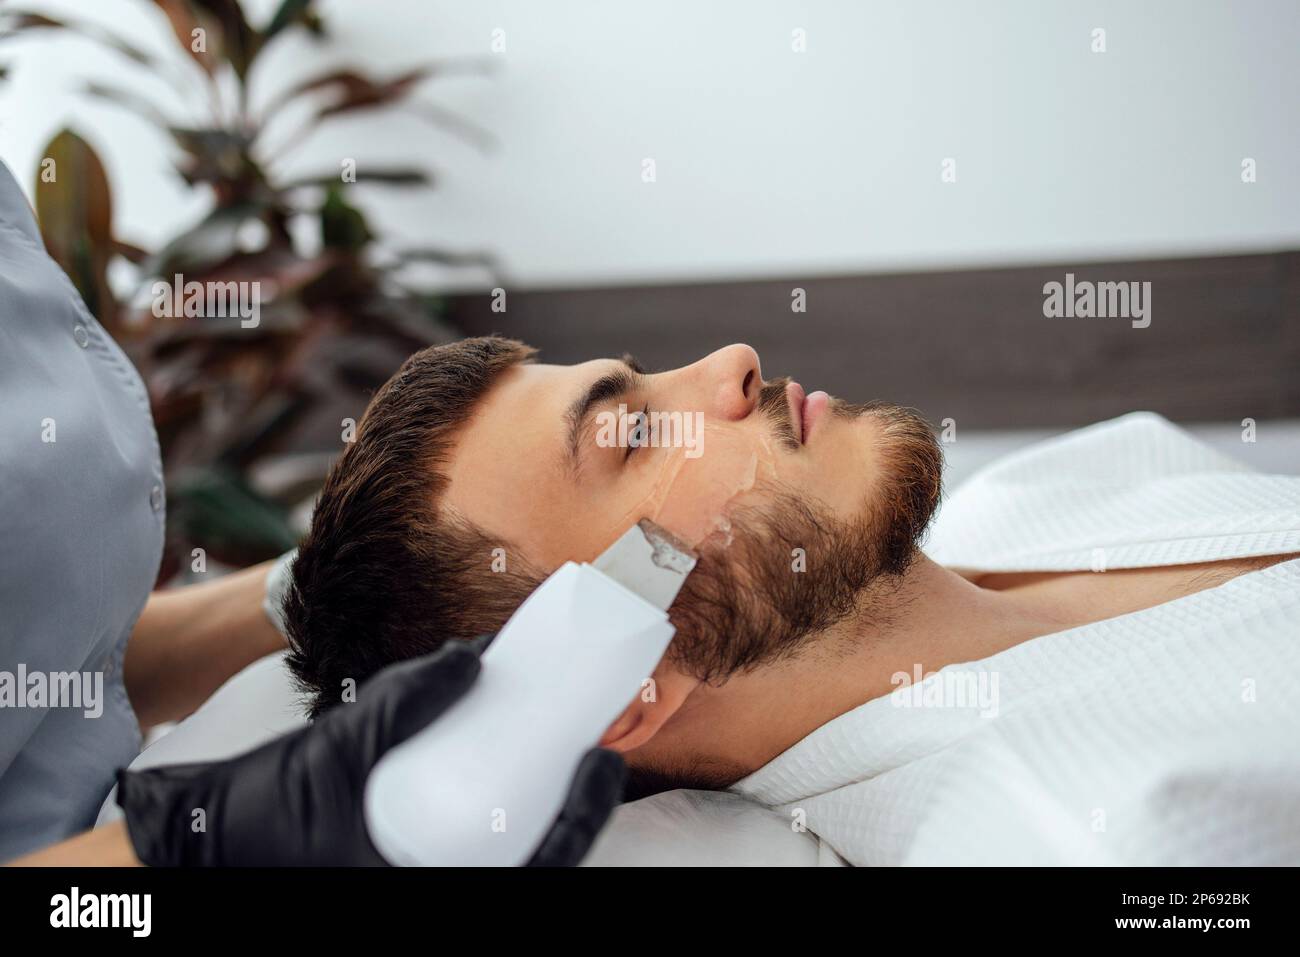 Beauty master makes ultrasonic facial peeling to her client. Youngcaucasian man doing an effective cleansing of the skin and pores in a beauty salon. Stock Photo